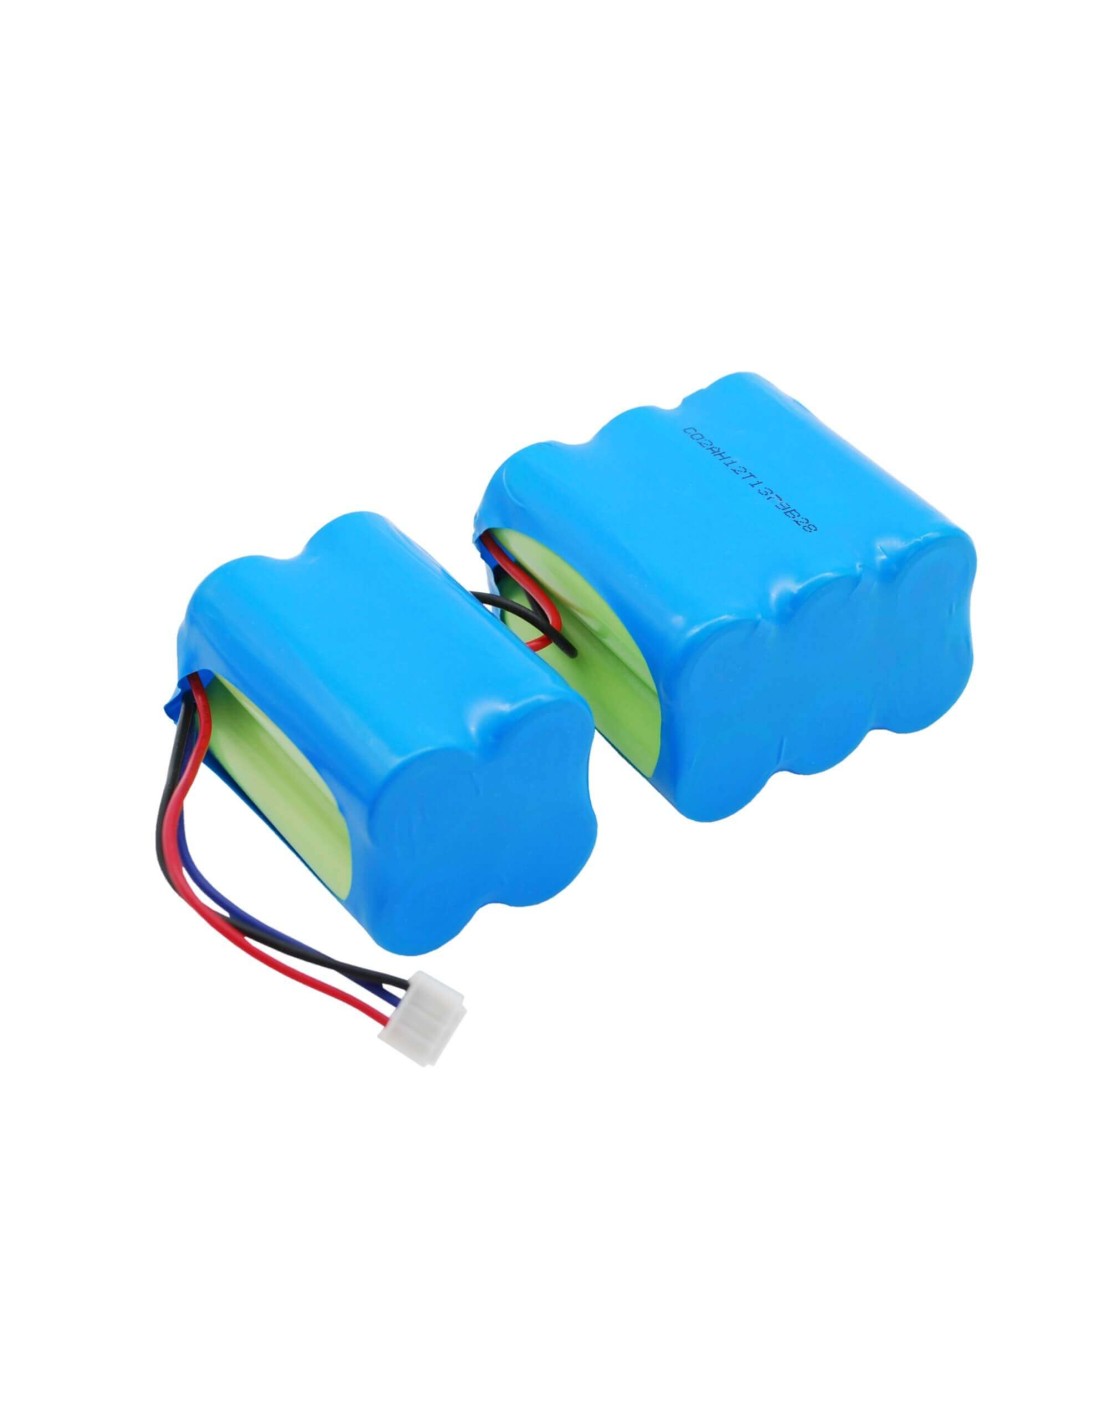 Battery for Topcon Gps Receiver 12.0V, 2500mAh - 30.00Wh